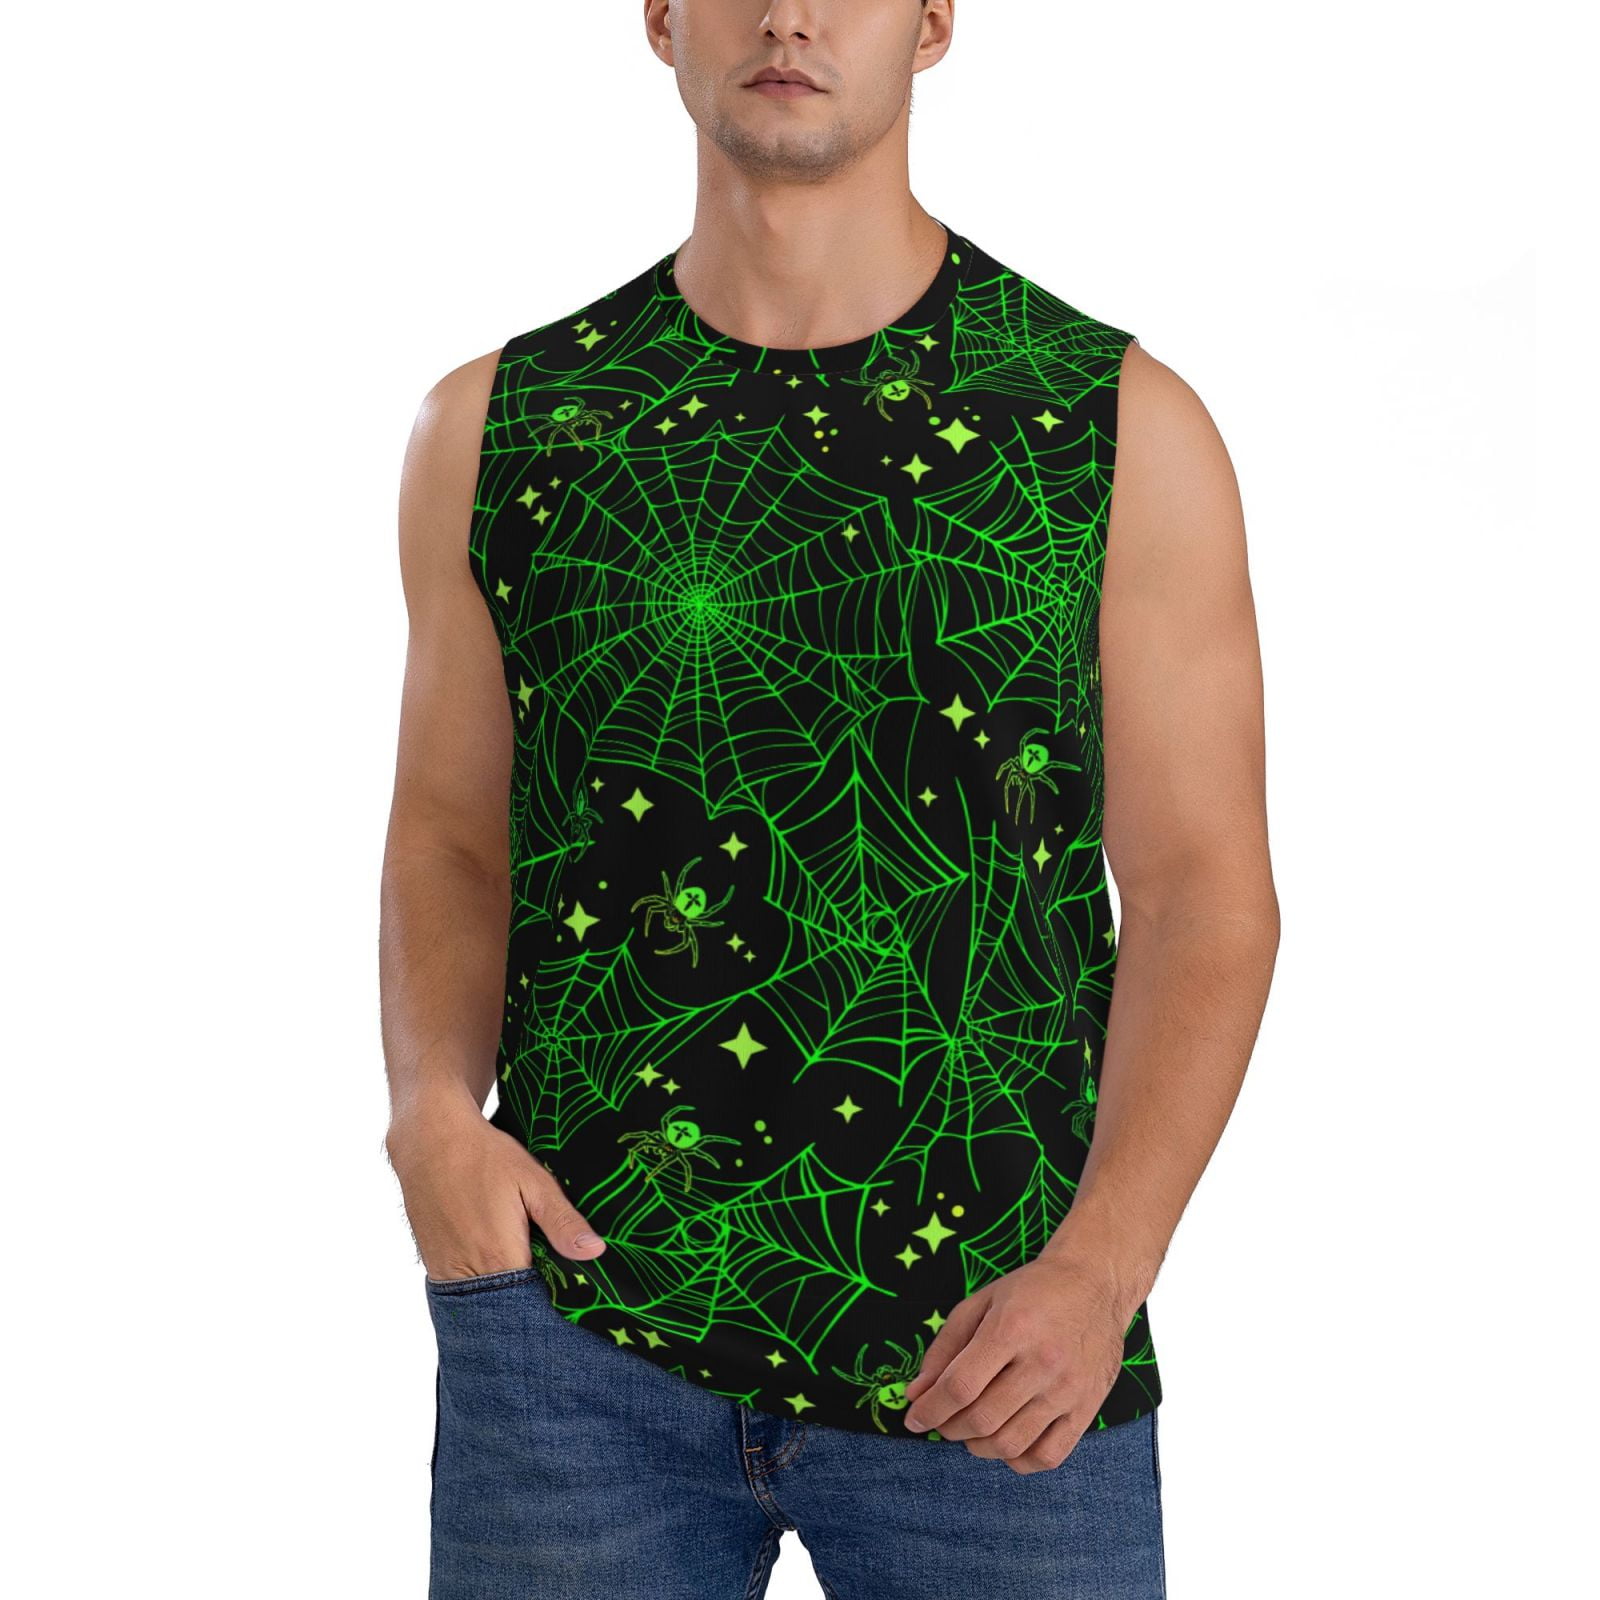 Gaeub Green Bright Web with Spiders Men's Sleeveless Muscle Shirts ...